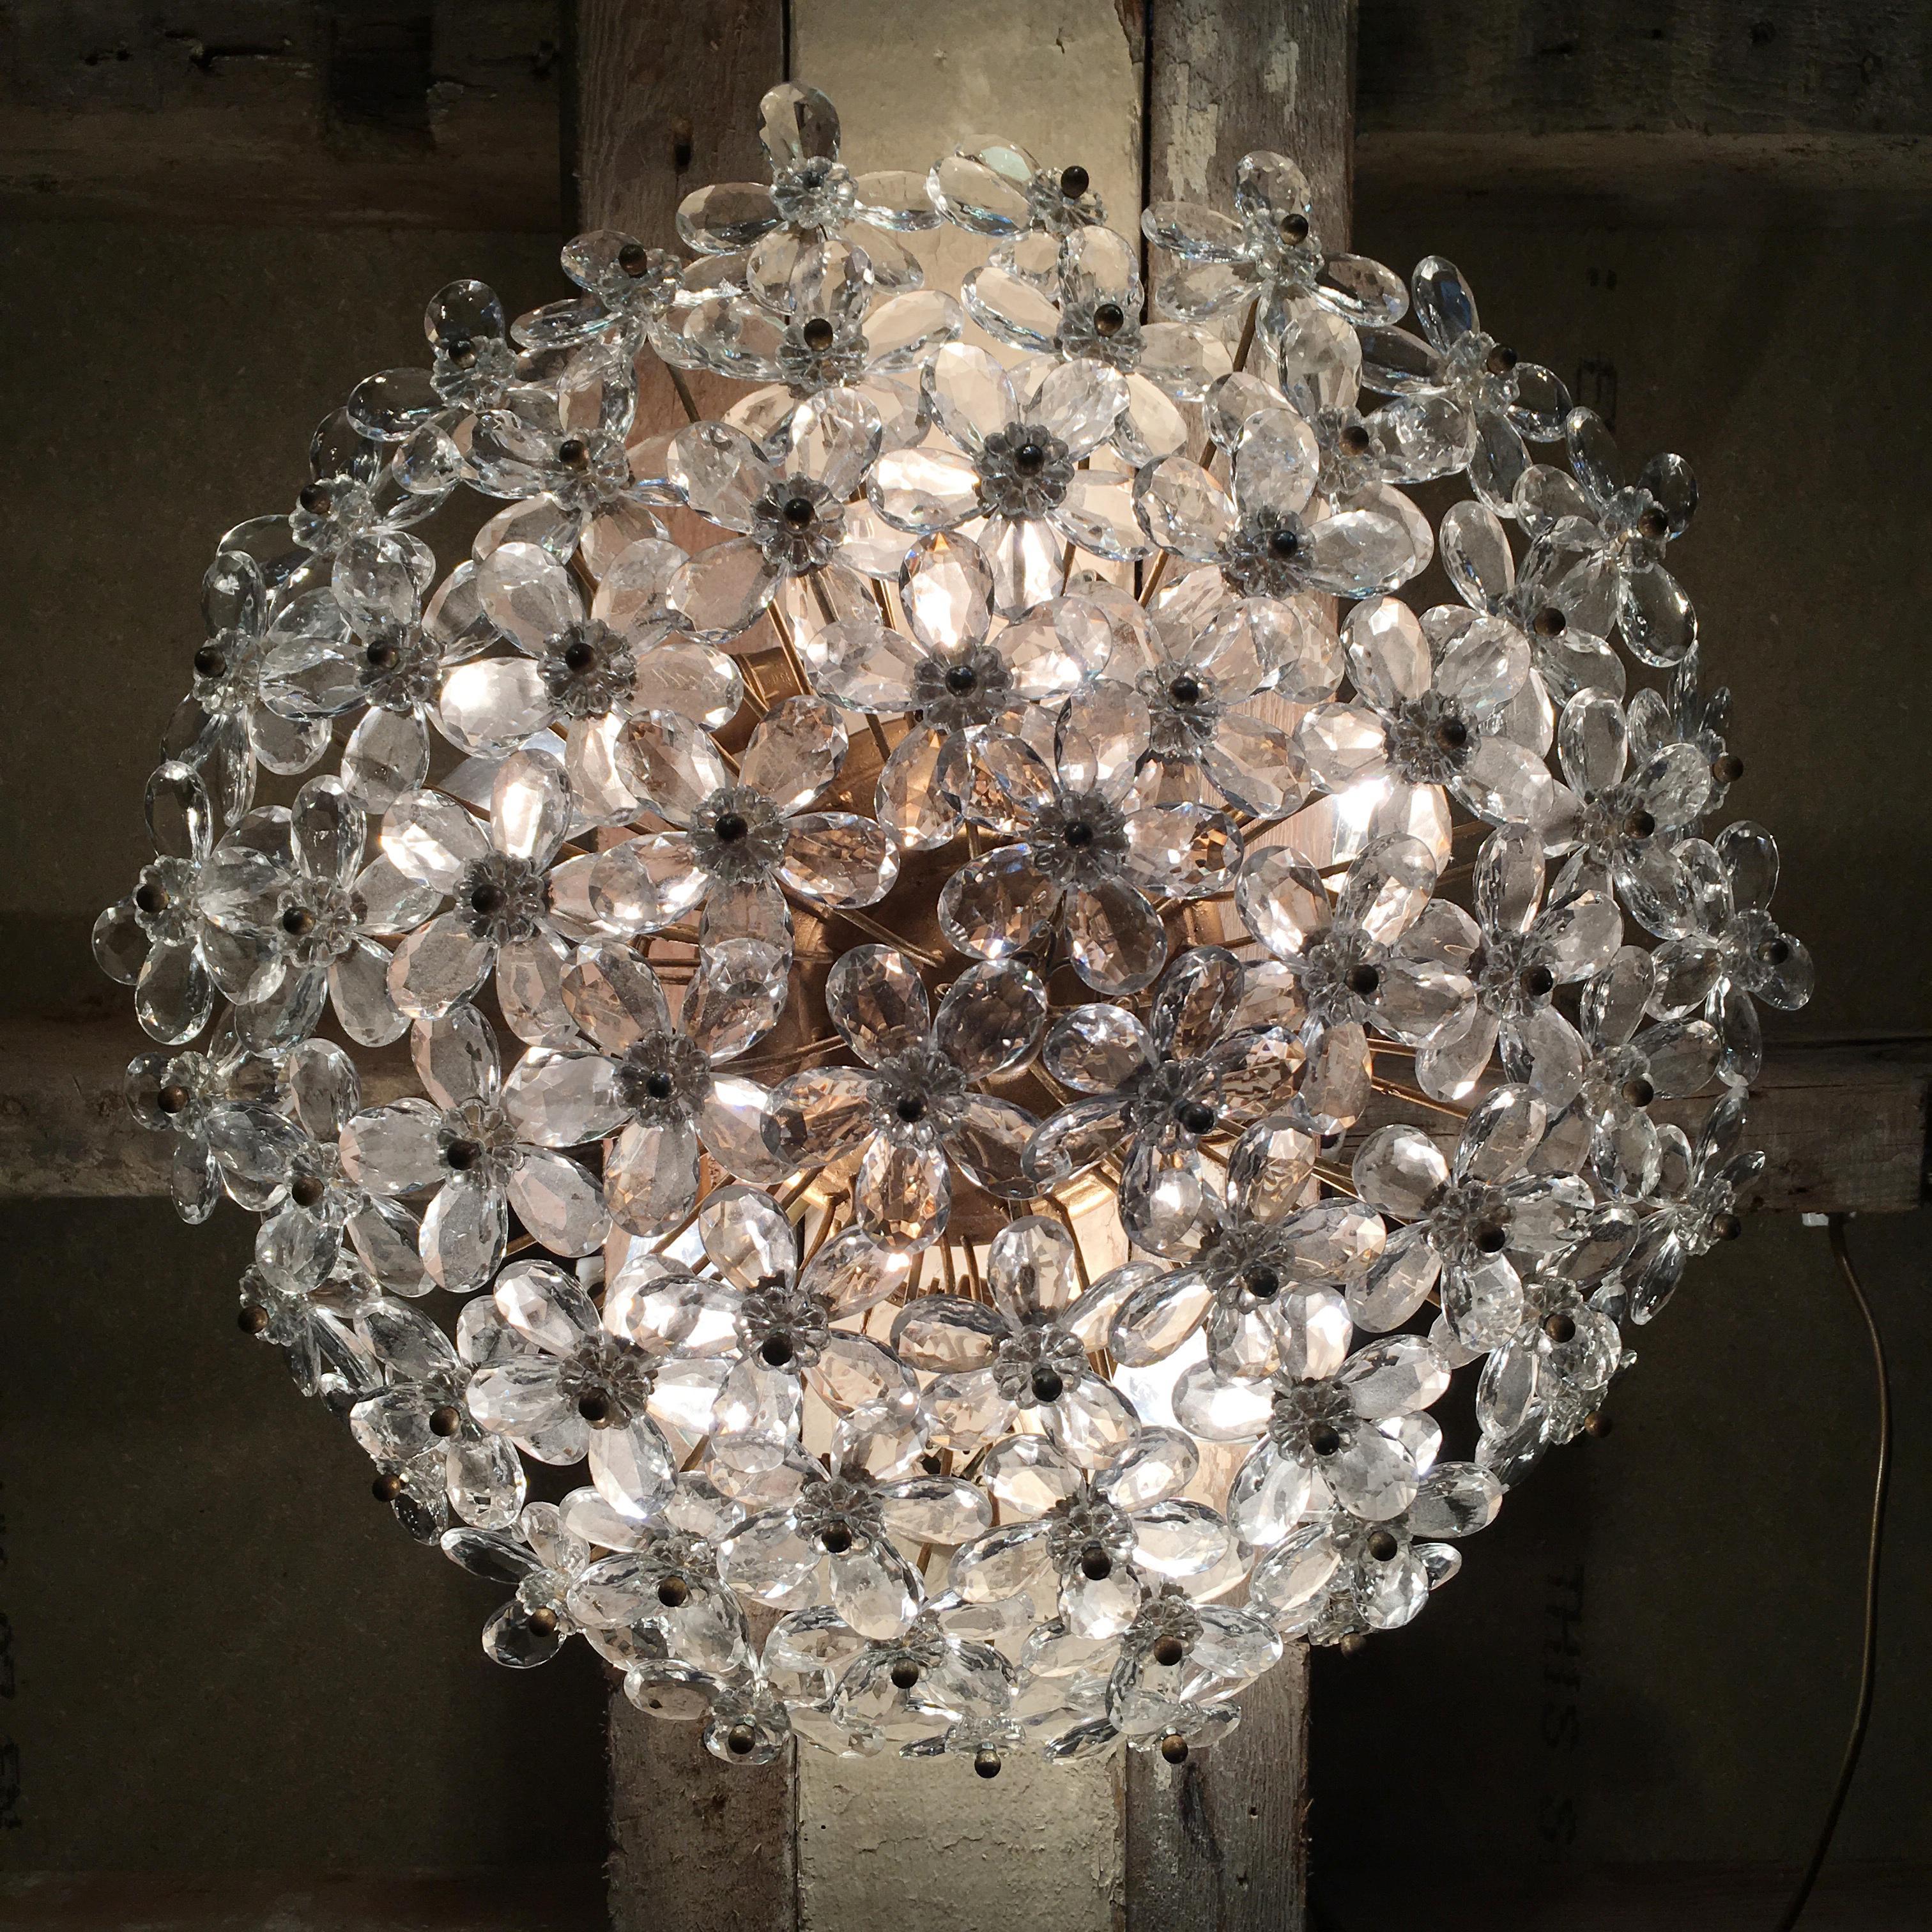 Huge Murano glass flush light

This beautiful light from the 1960s is packed full of crystal cut faceted clear glass flowers on stems forming a sparkling dome

The light is heavy and attaches to the ceiling with a hook fixture on the rose
the